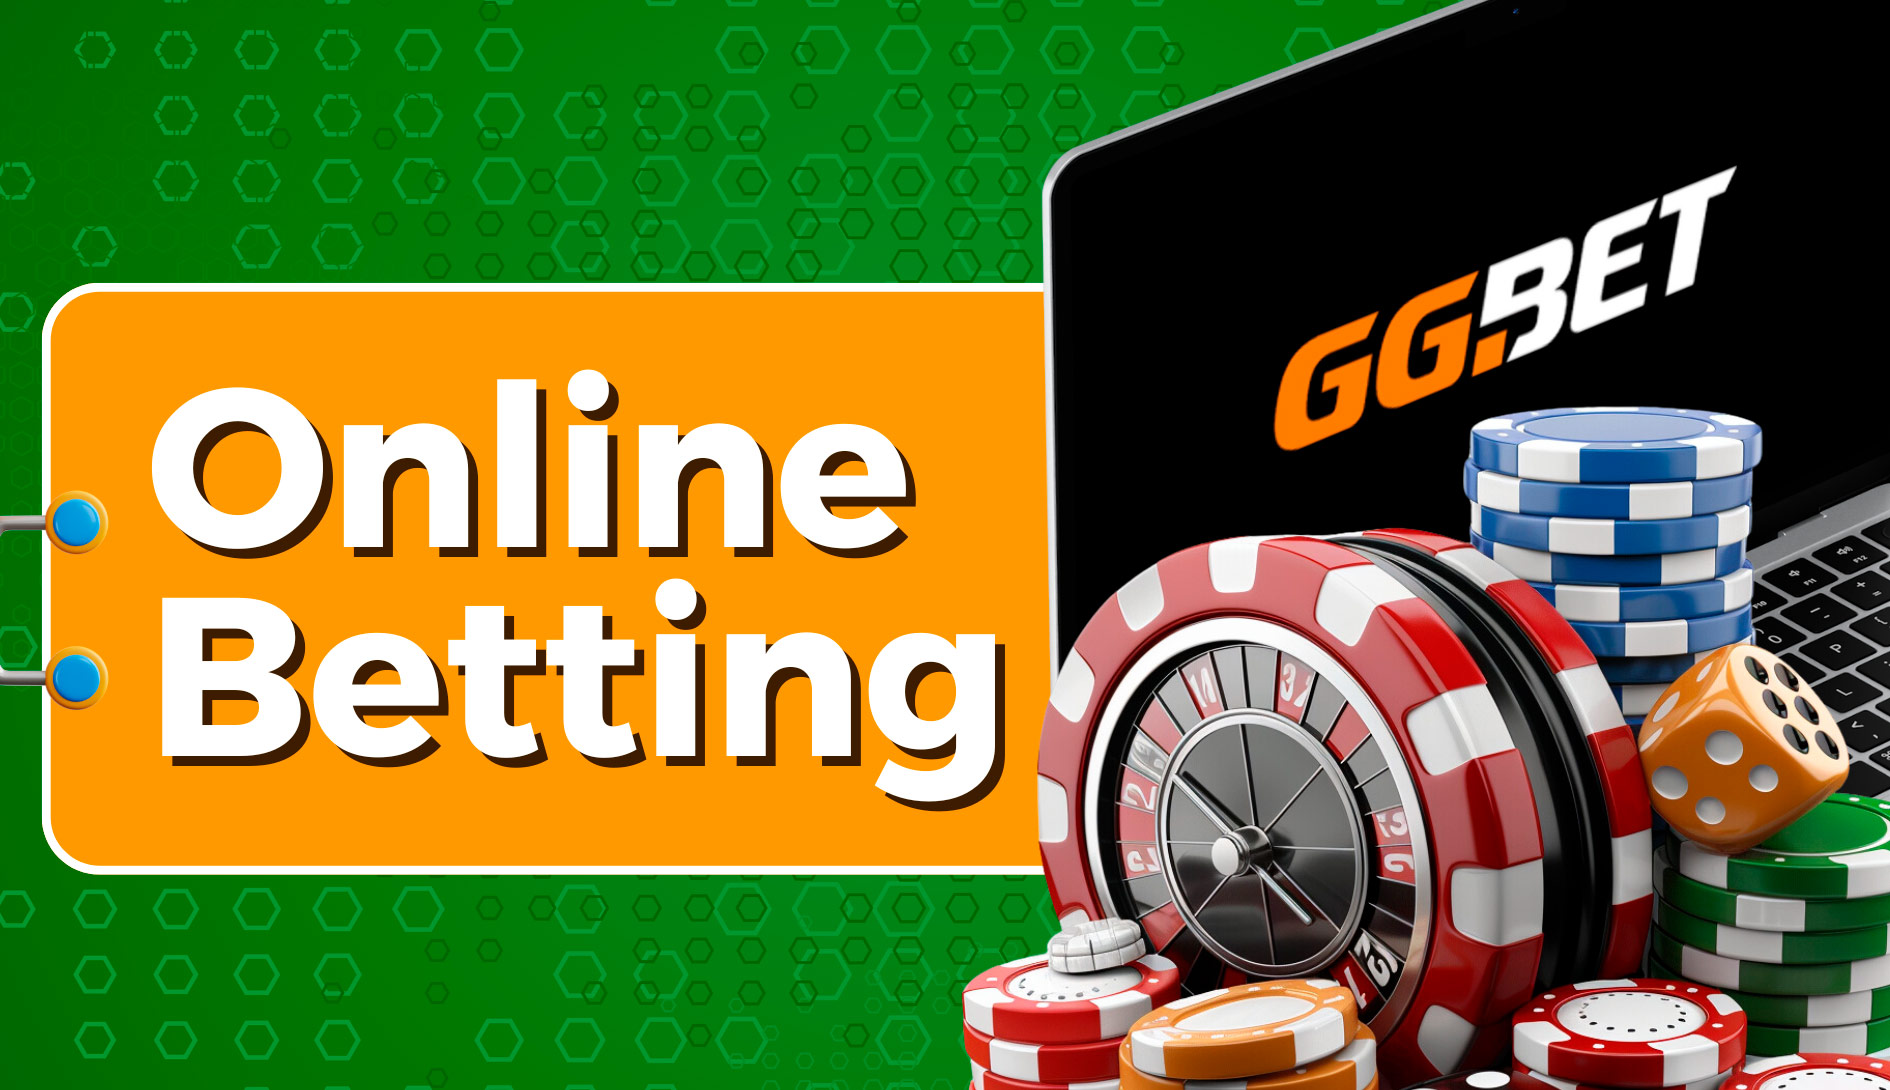 GGbet: Your Legal and Trustworthy Online Betting Destination